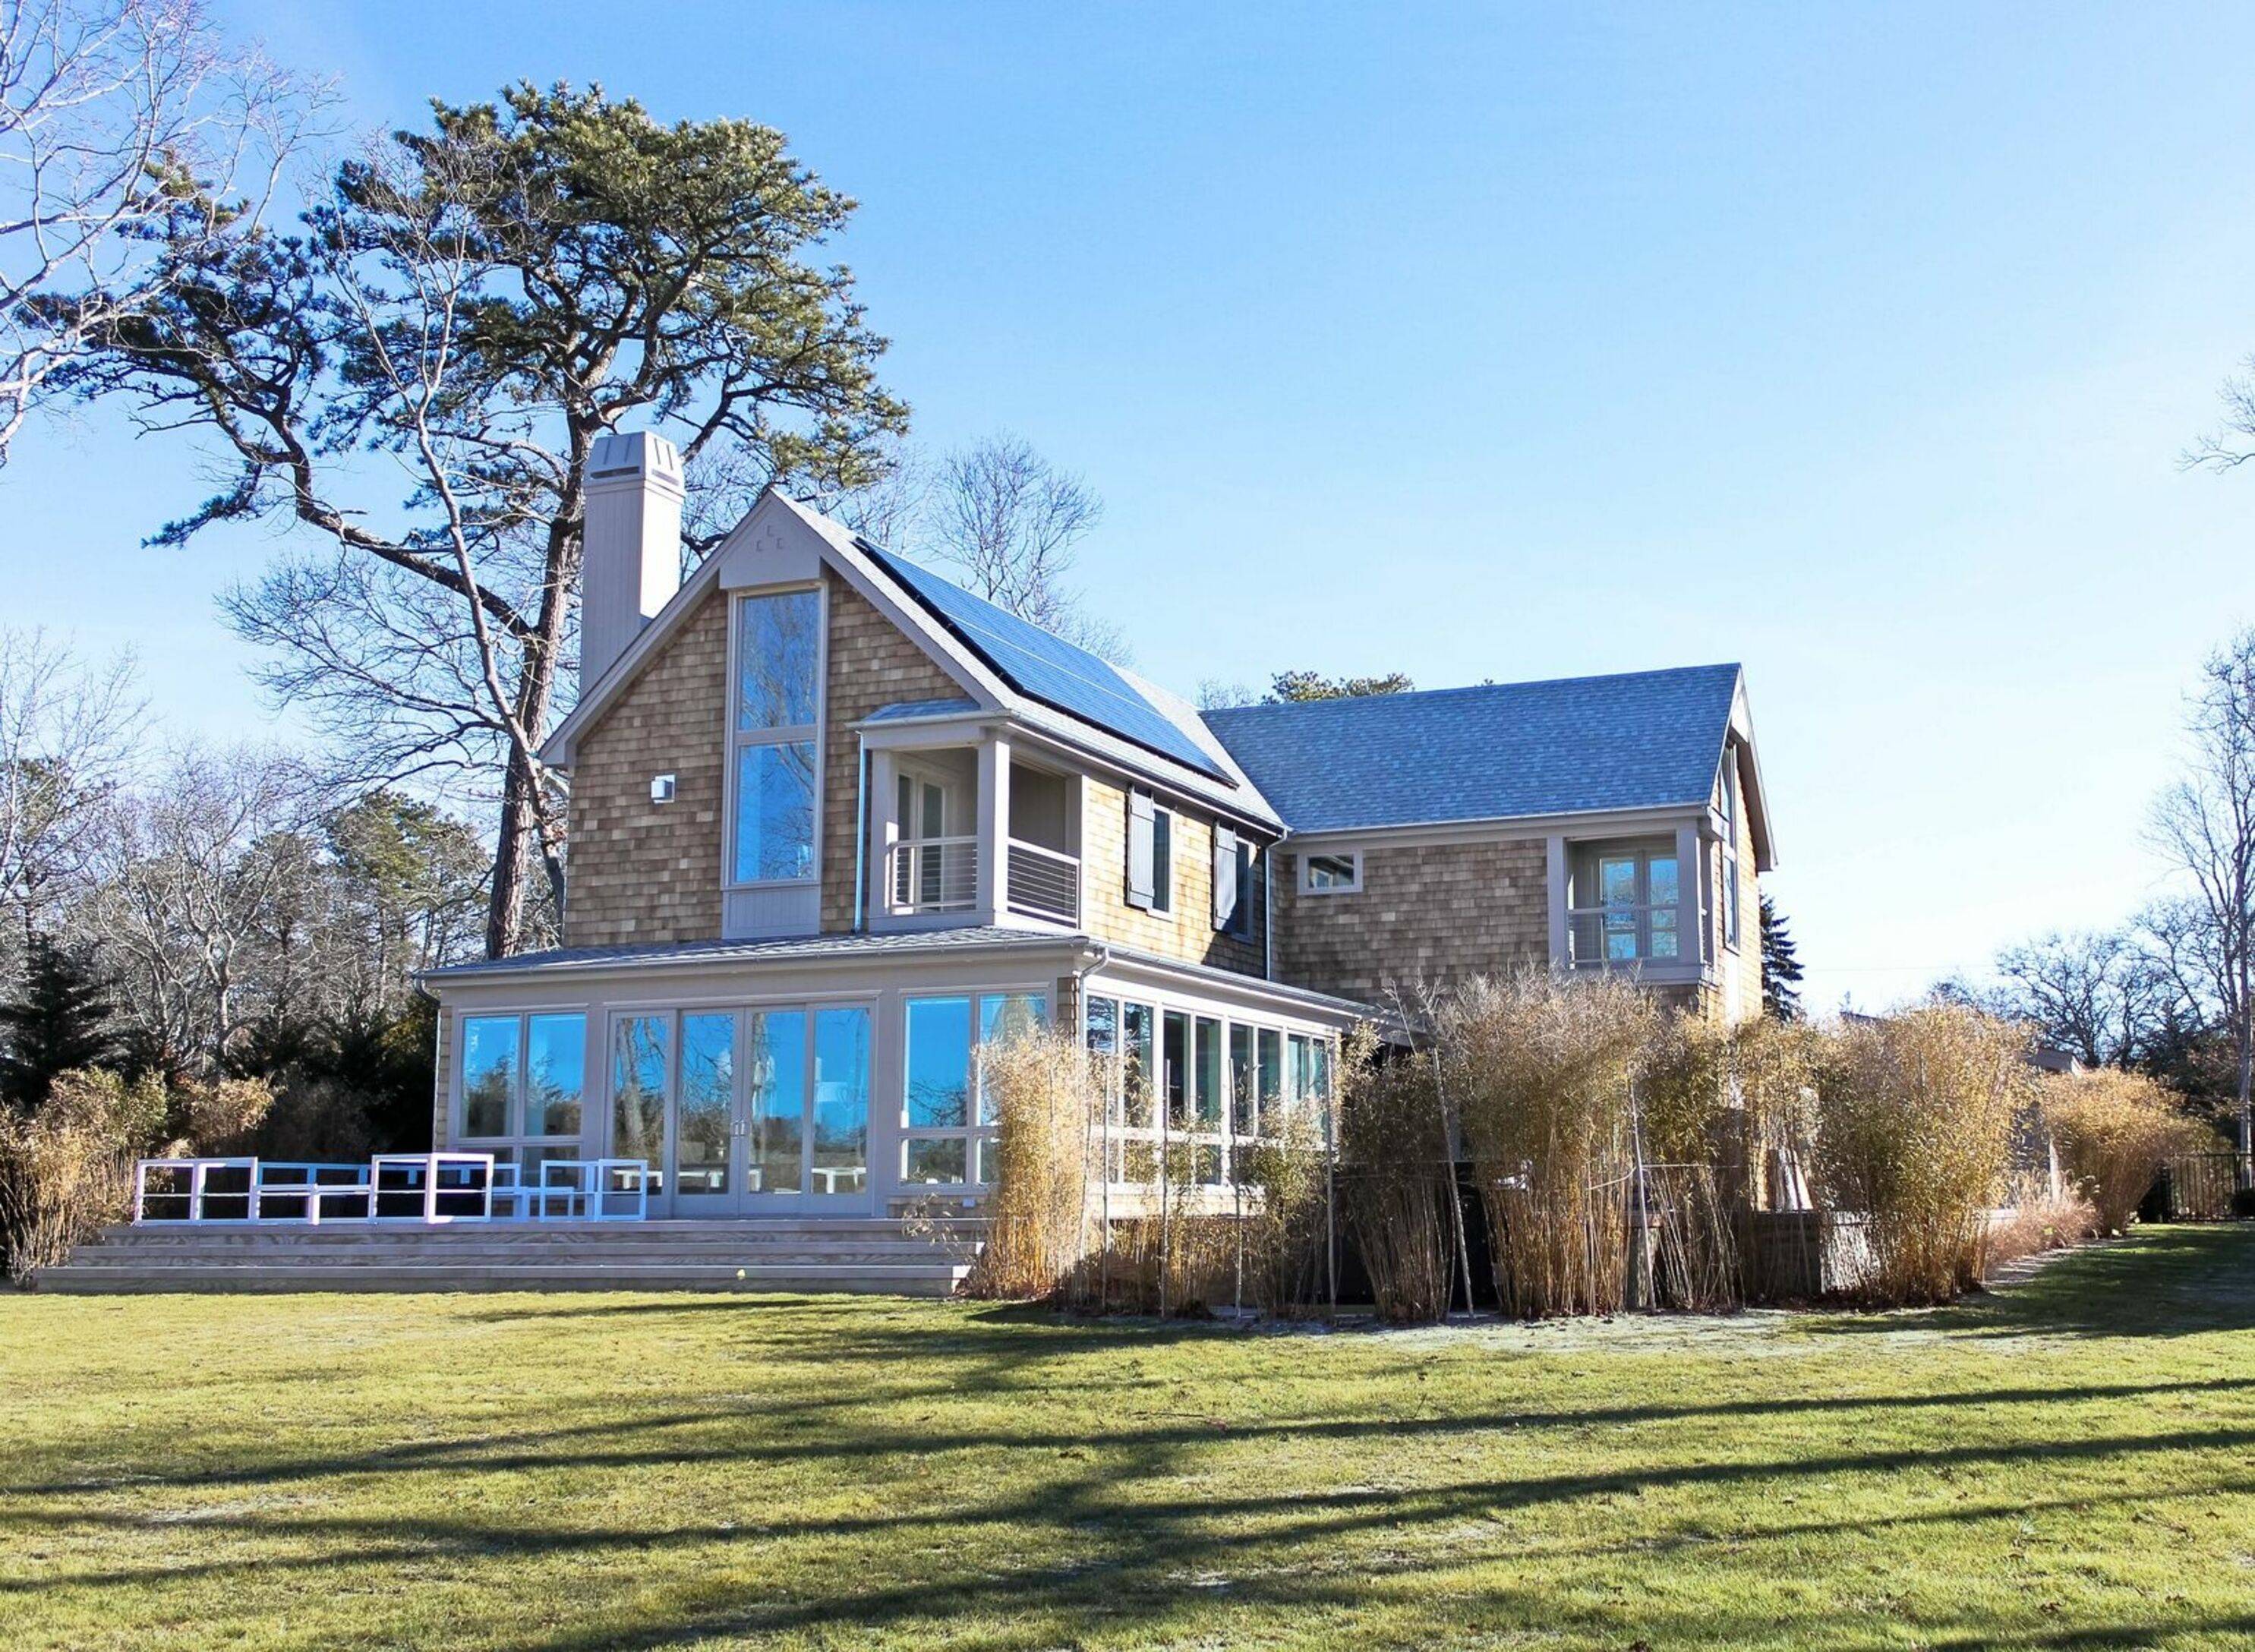 Waterfront in Quogue